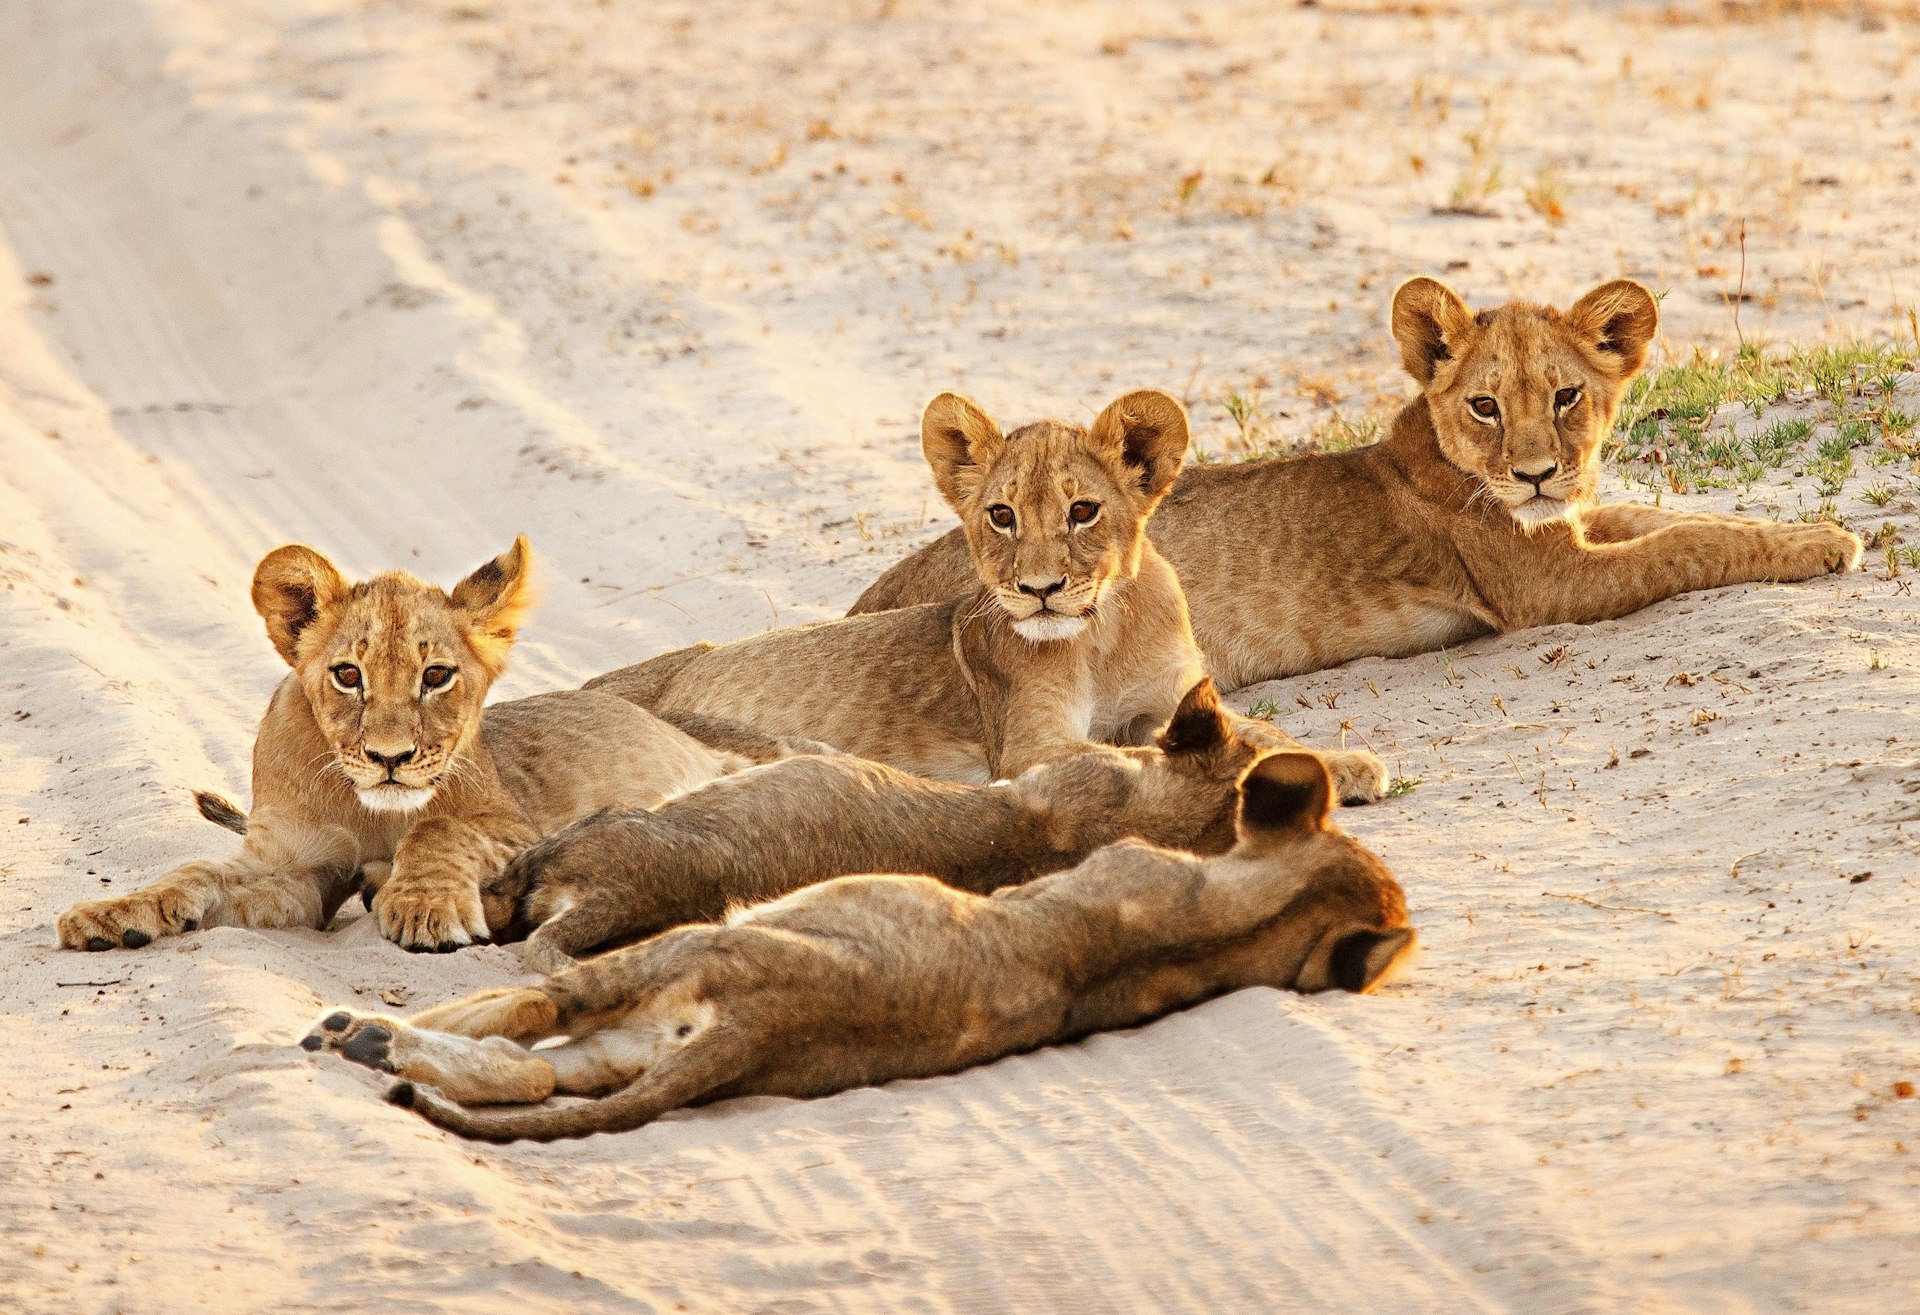 Five lion cubs lay on a sandy vehicle track; three have their heads up and face the camera. Two have their backs to the camera and are asleep, with their heads down.